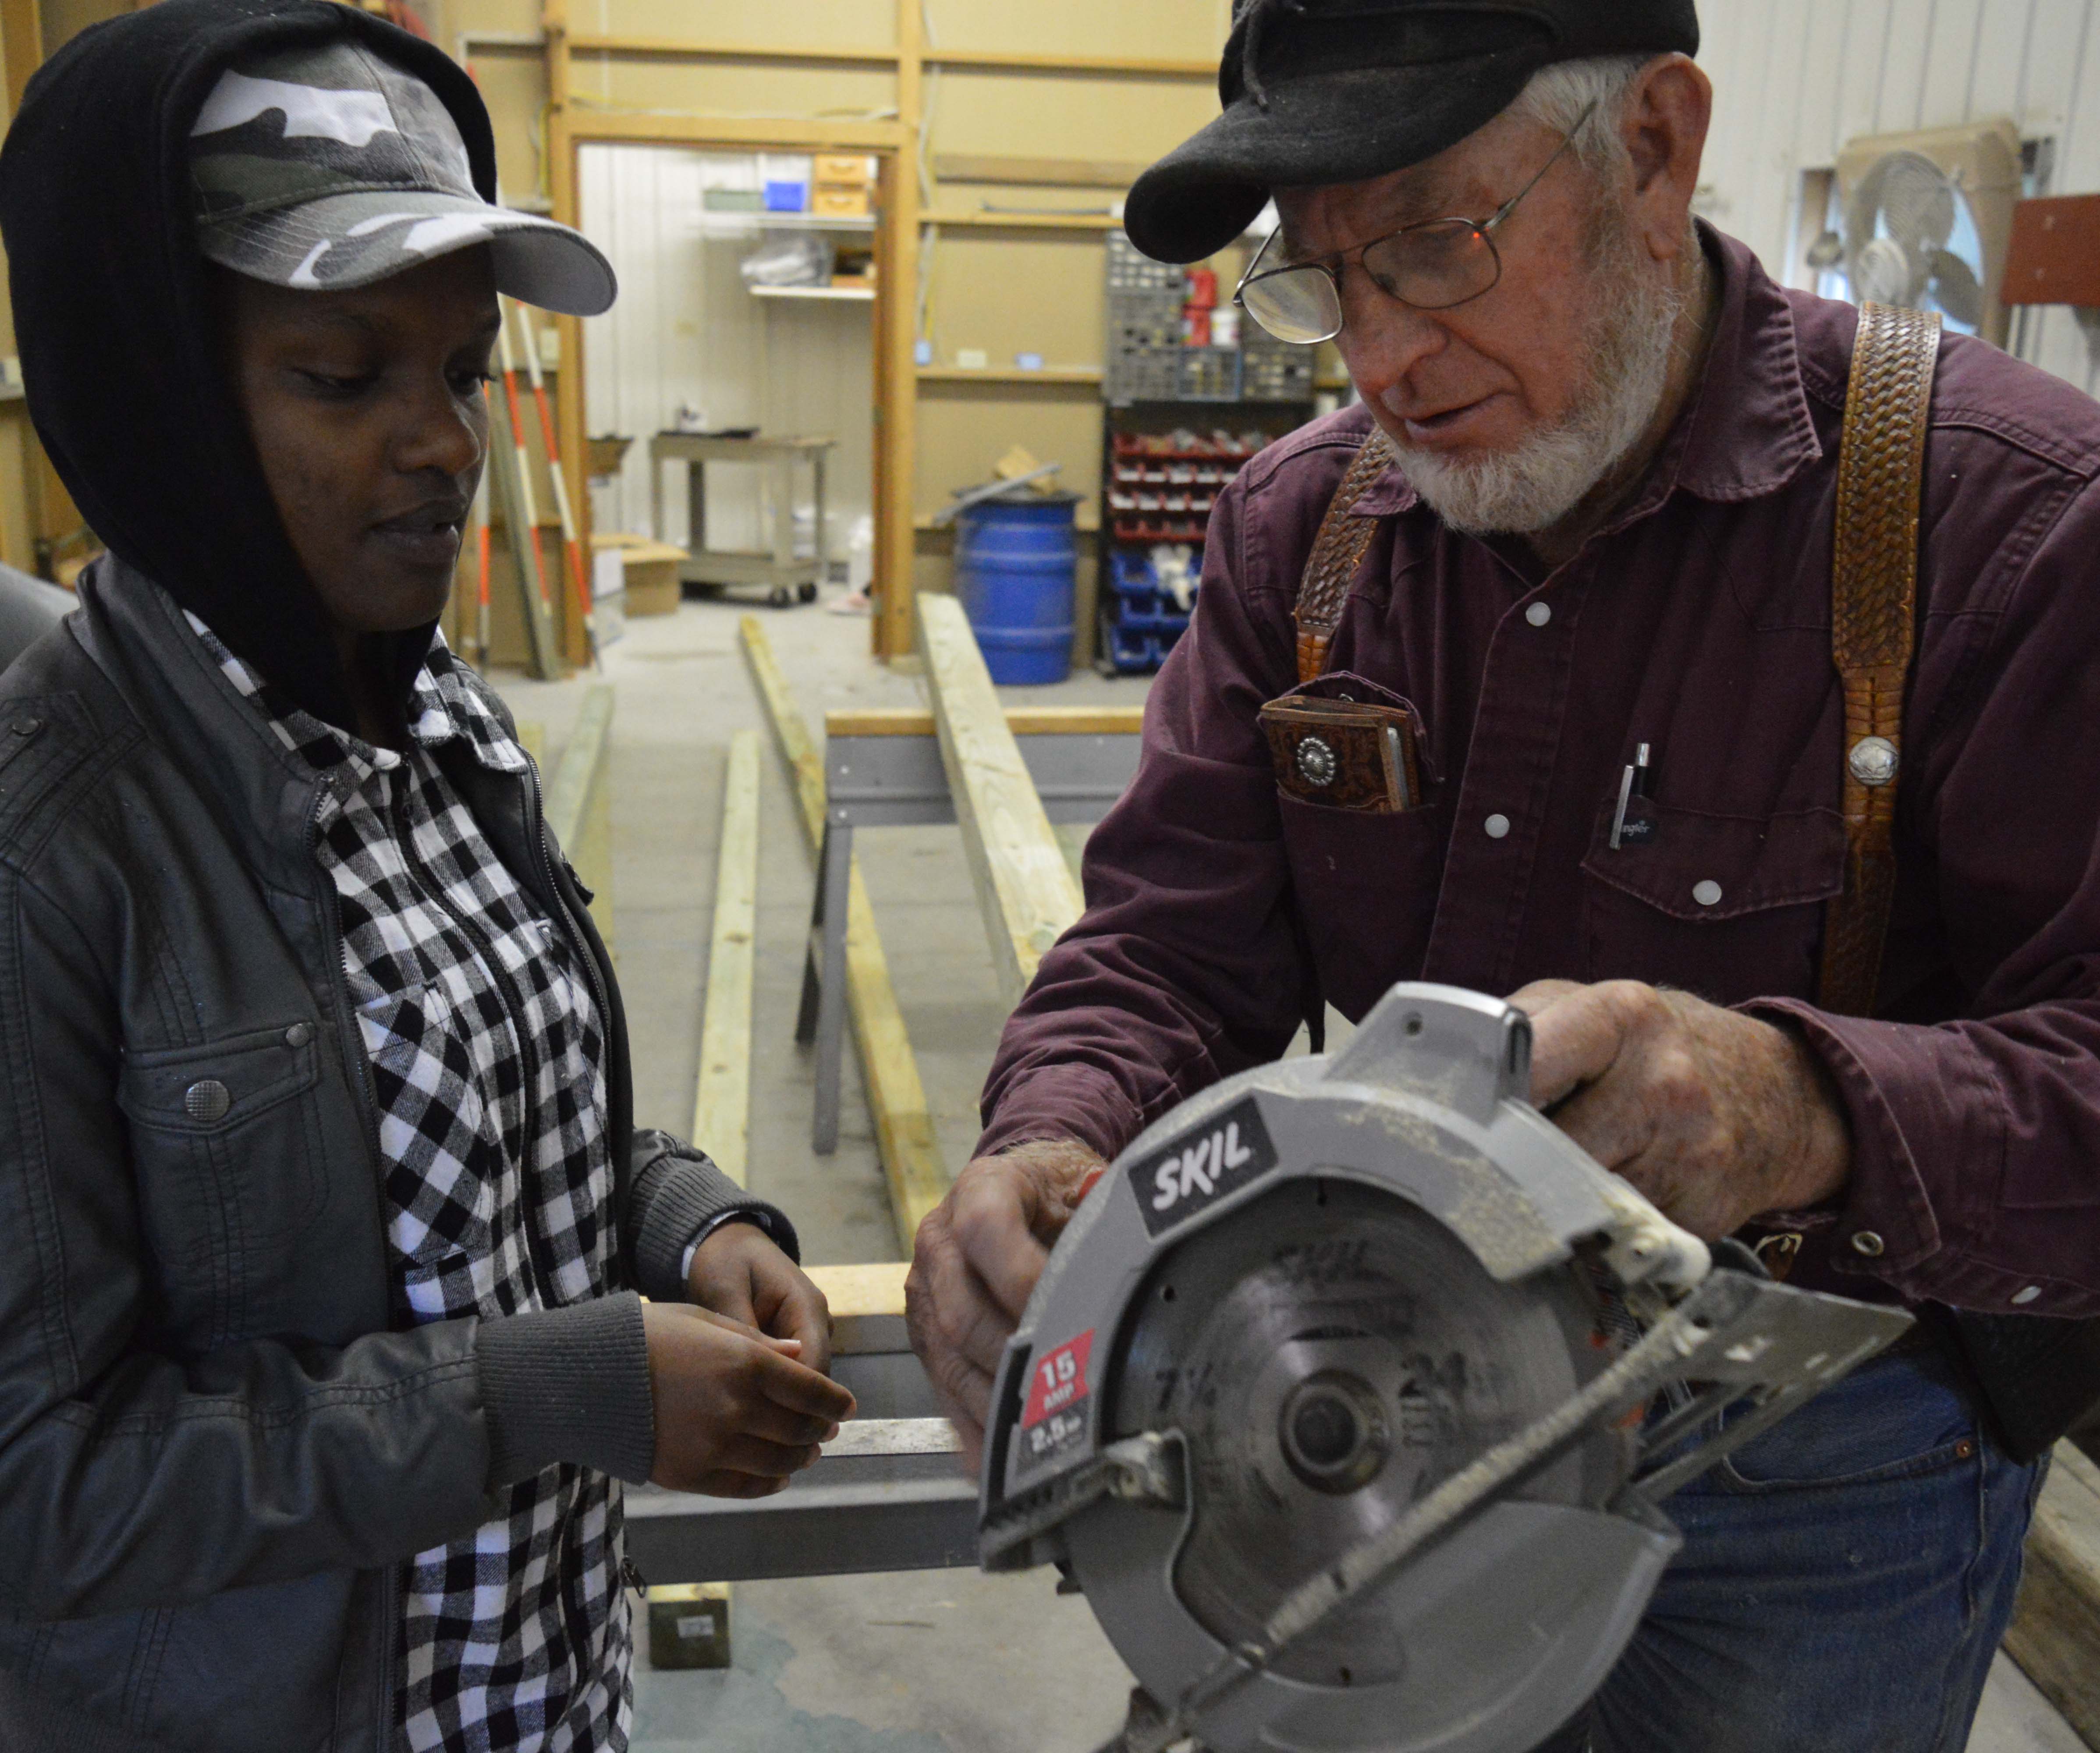 CUSP student Yvonne Ingabire receives safety instructions before operating a power saw in a construction class taught by Roy Cole. He designed a sheep shed which students are building for the NCTA campus farm. (Crawford/NCTA News)